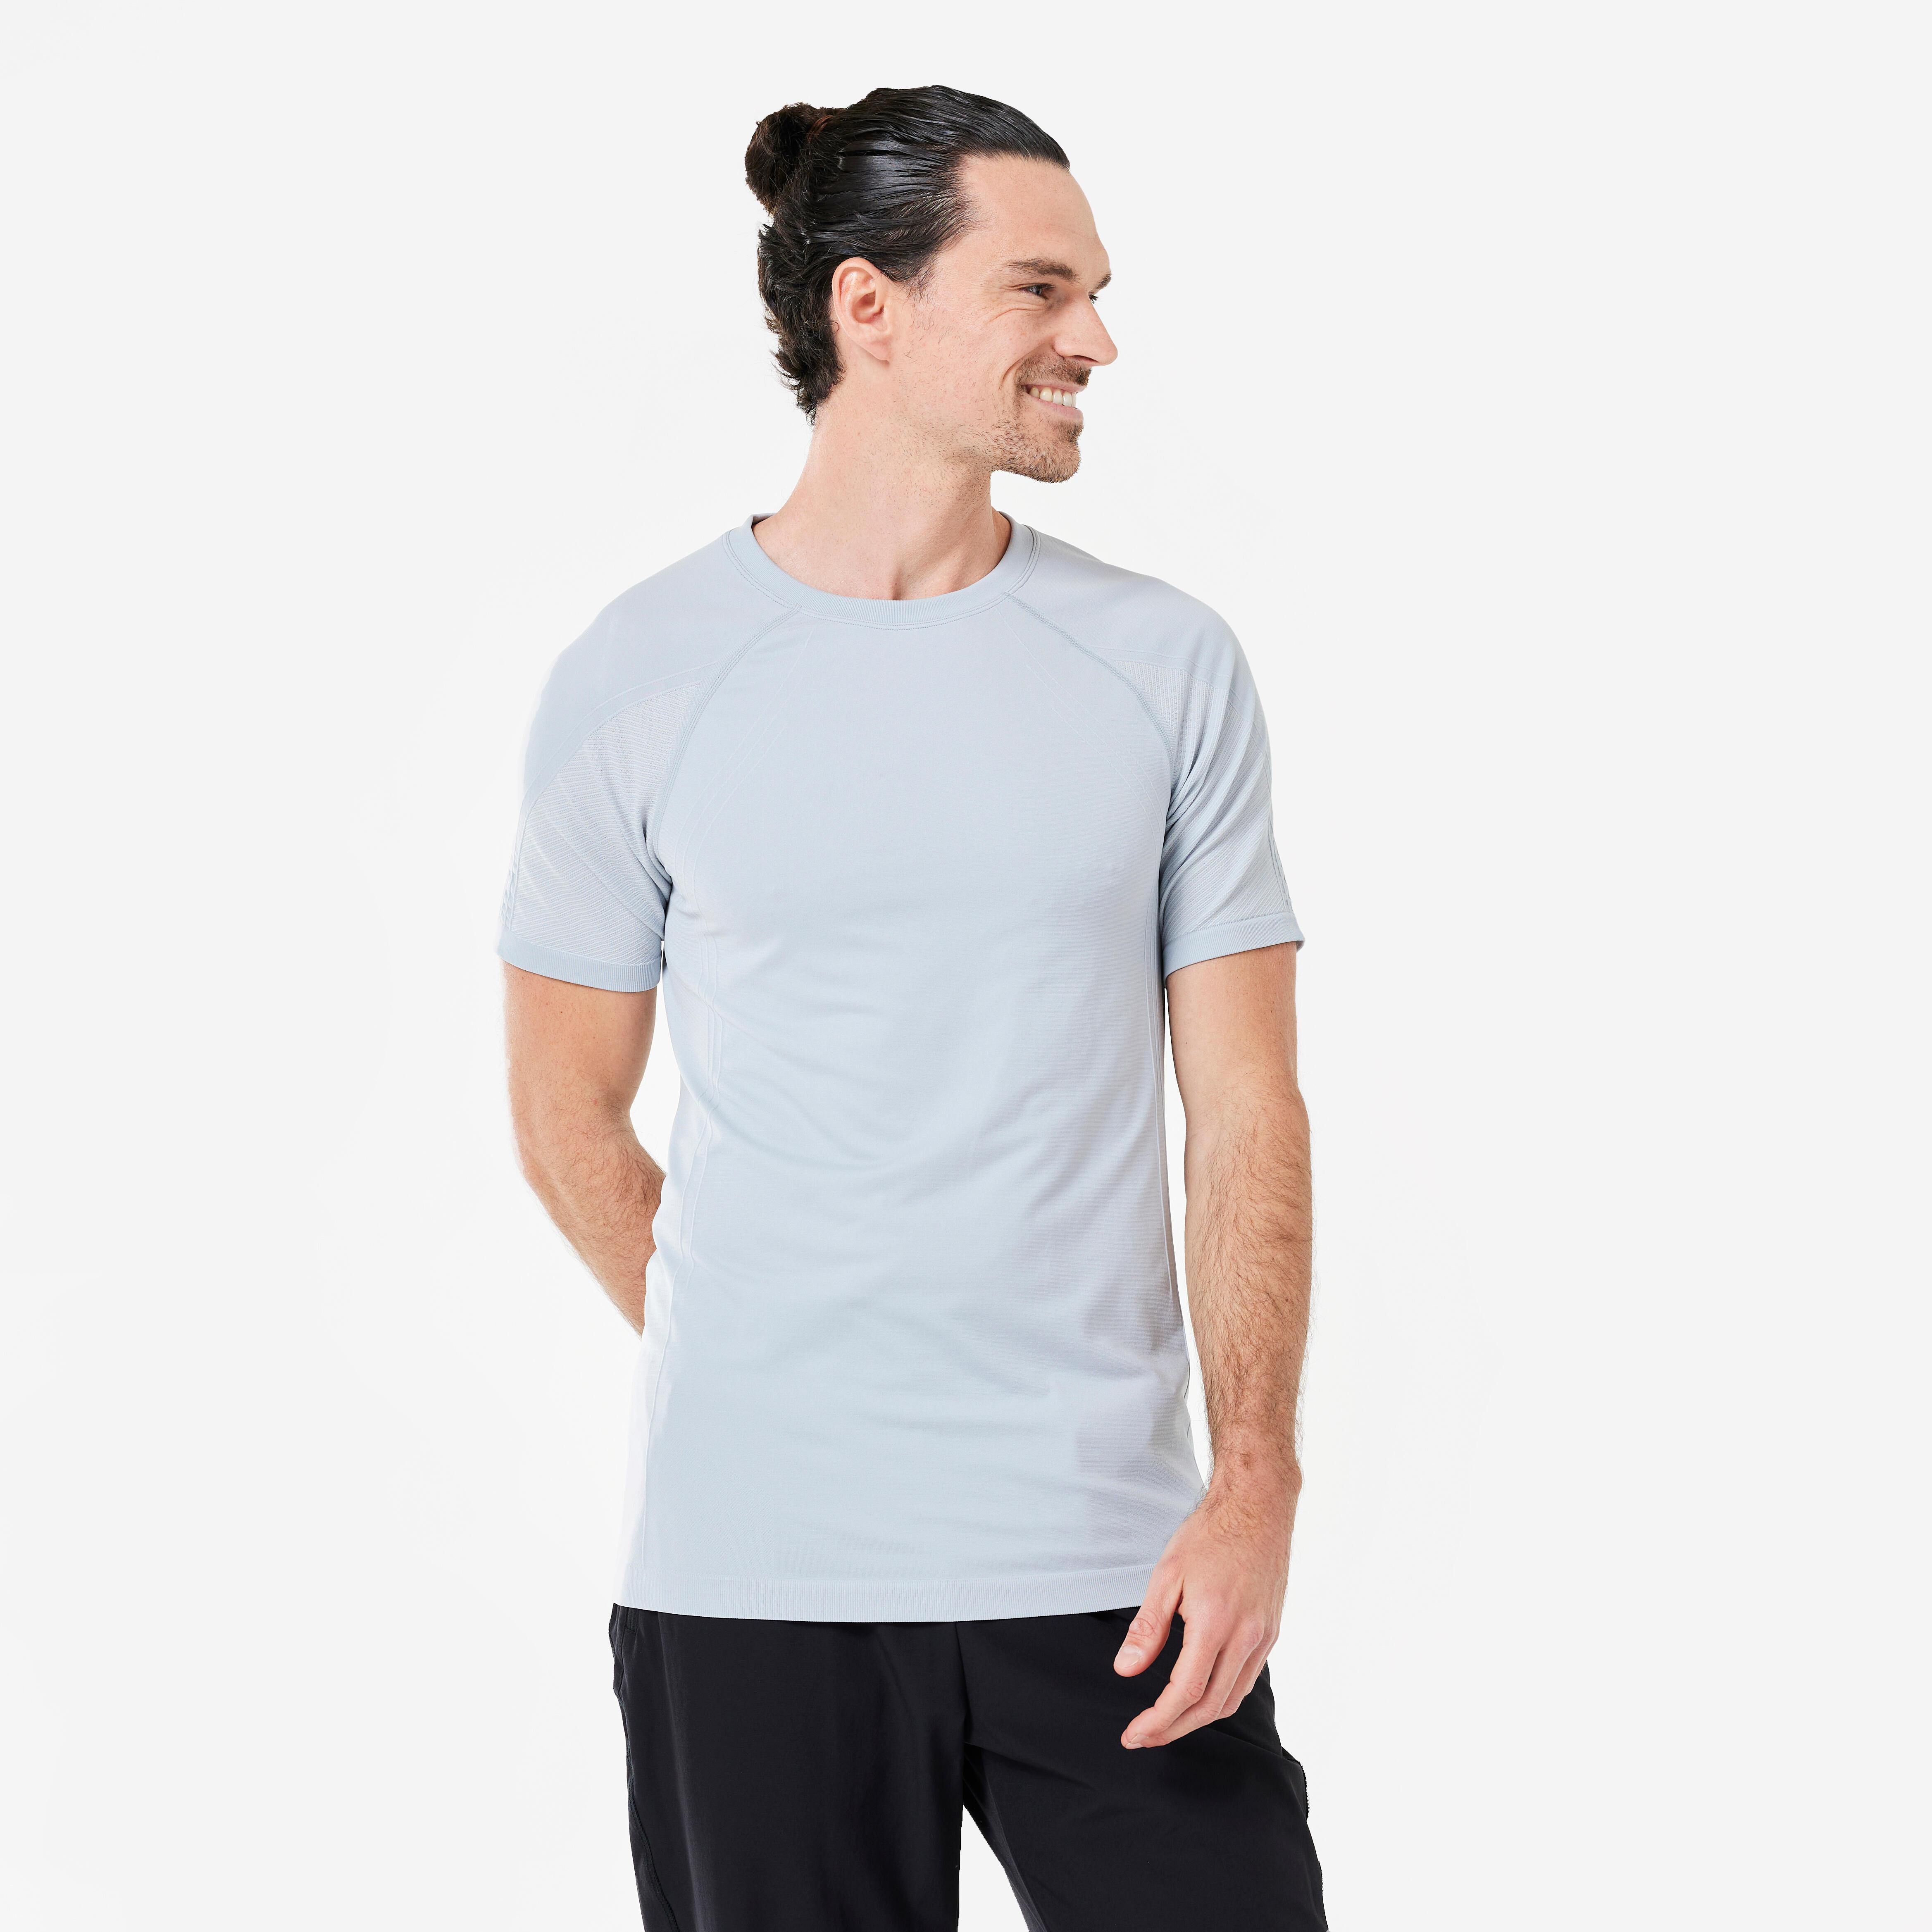 KIMJALY  T-shirt manches courtes - SEAMLESS  DYN 